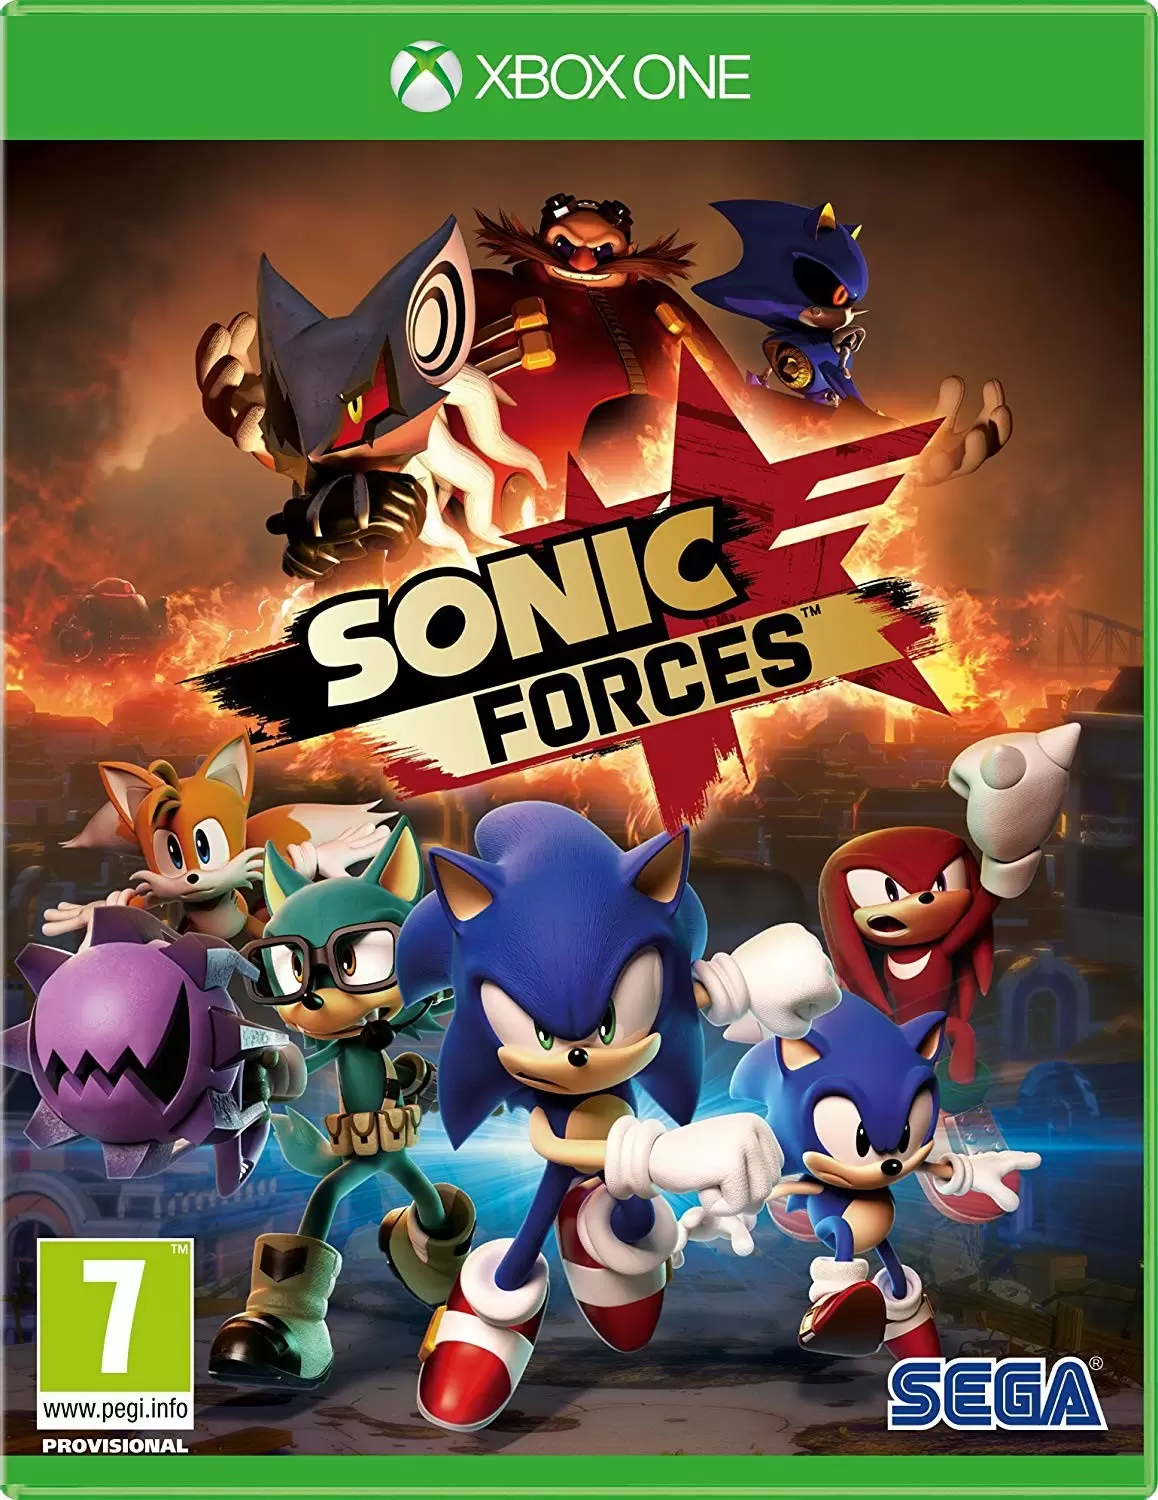 XBOX One Games - Sonic Forces